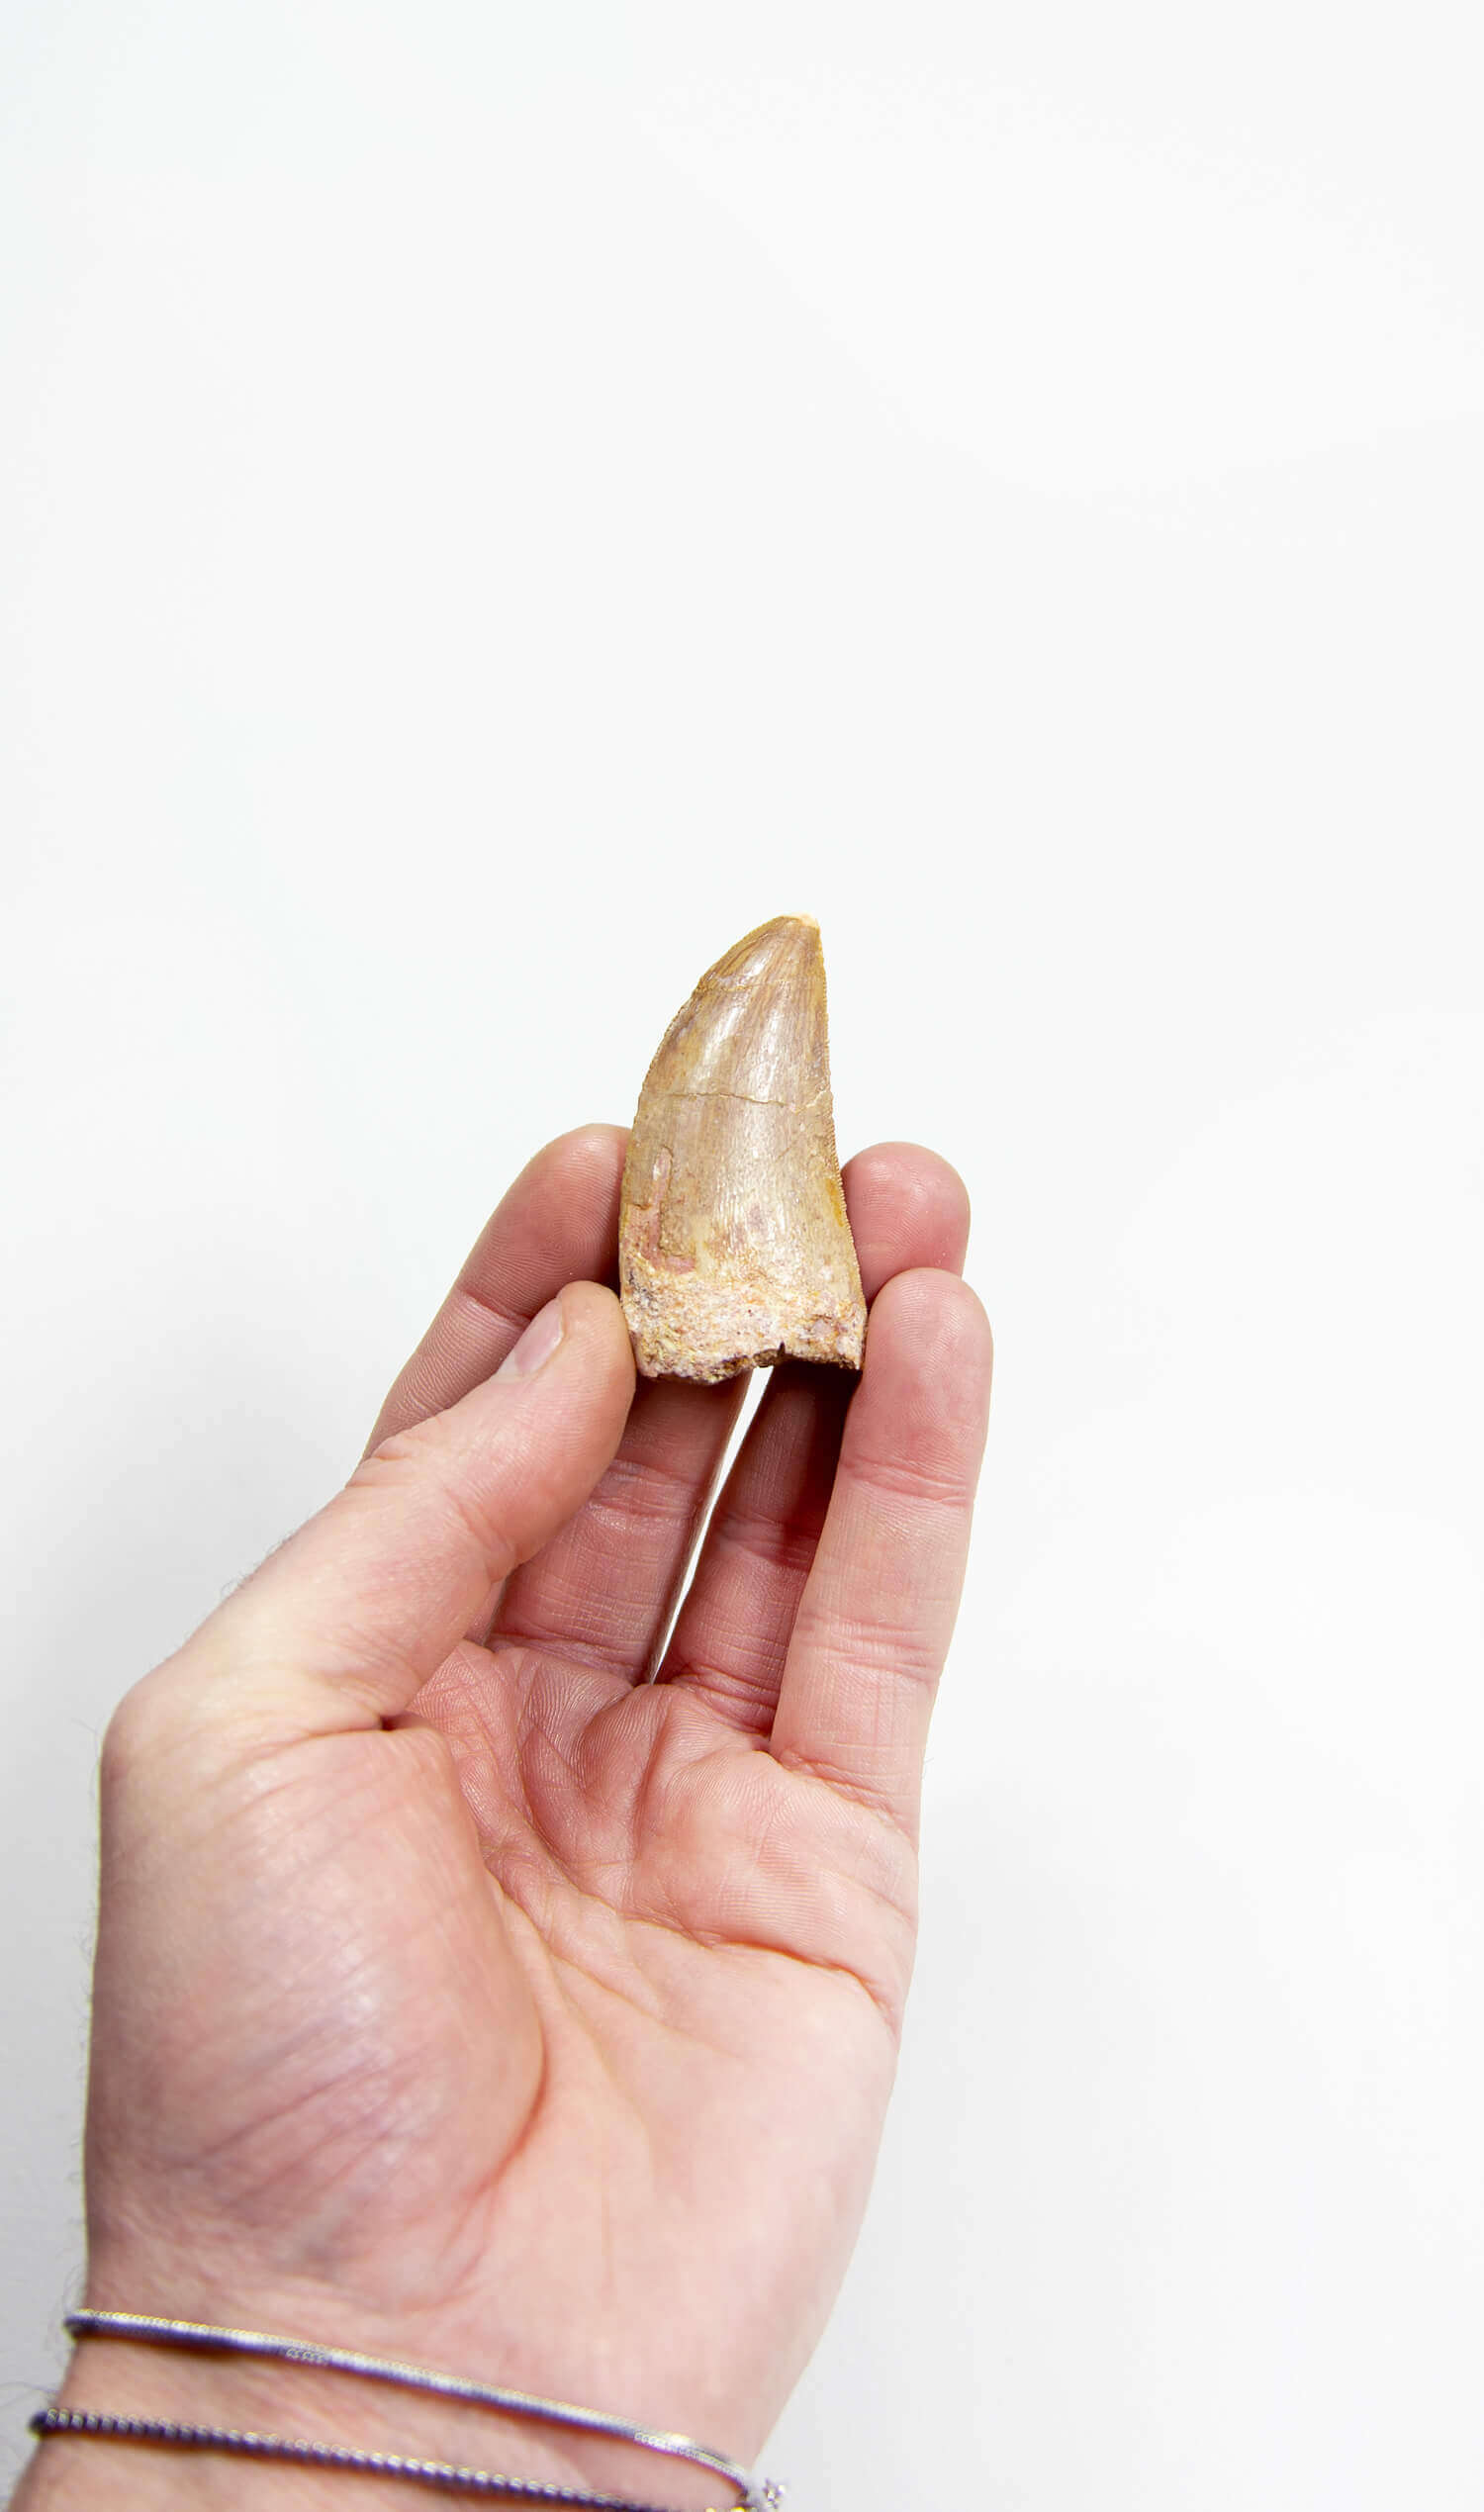 real fossil dinosaur carcharodontosaurus tooth for sale at the uk fossil store 36